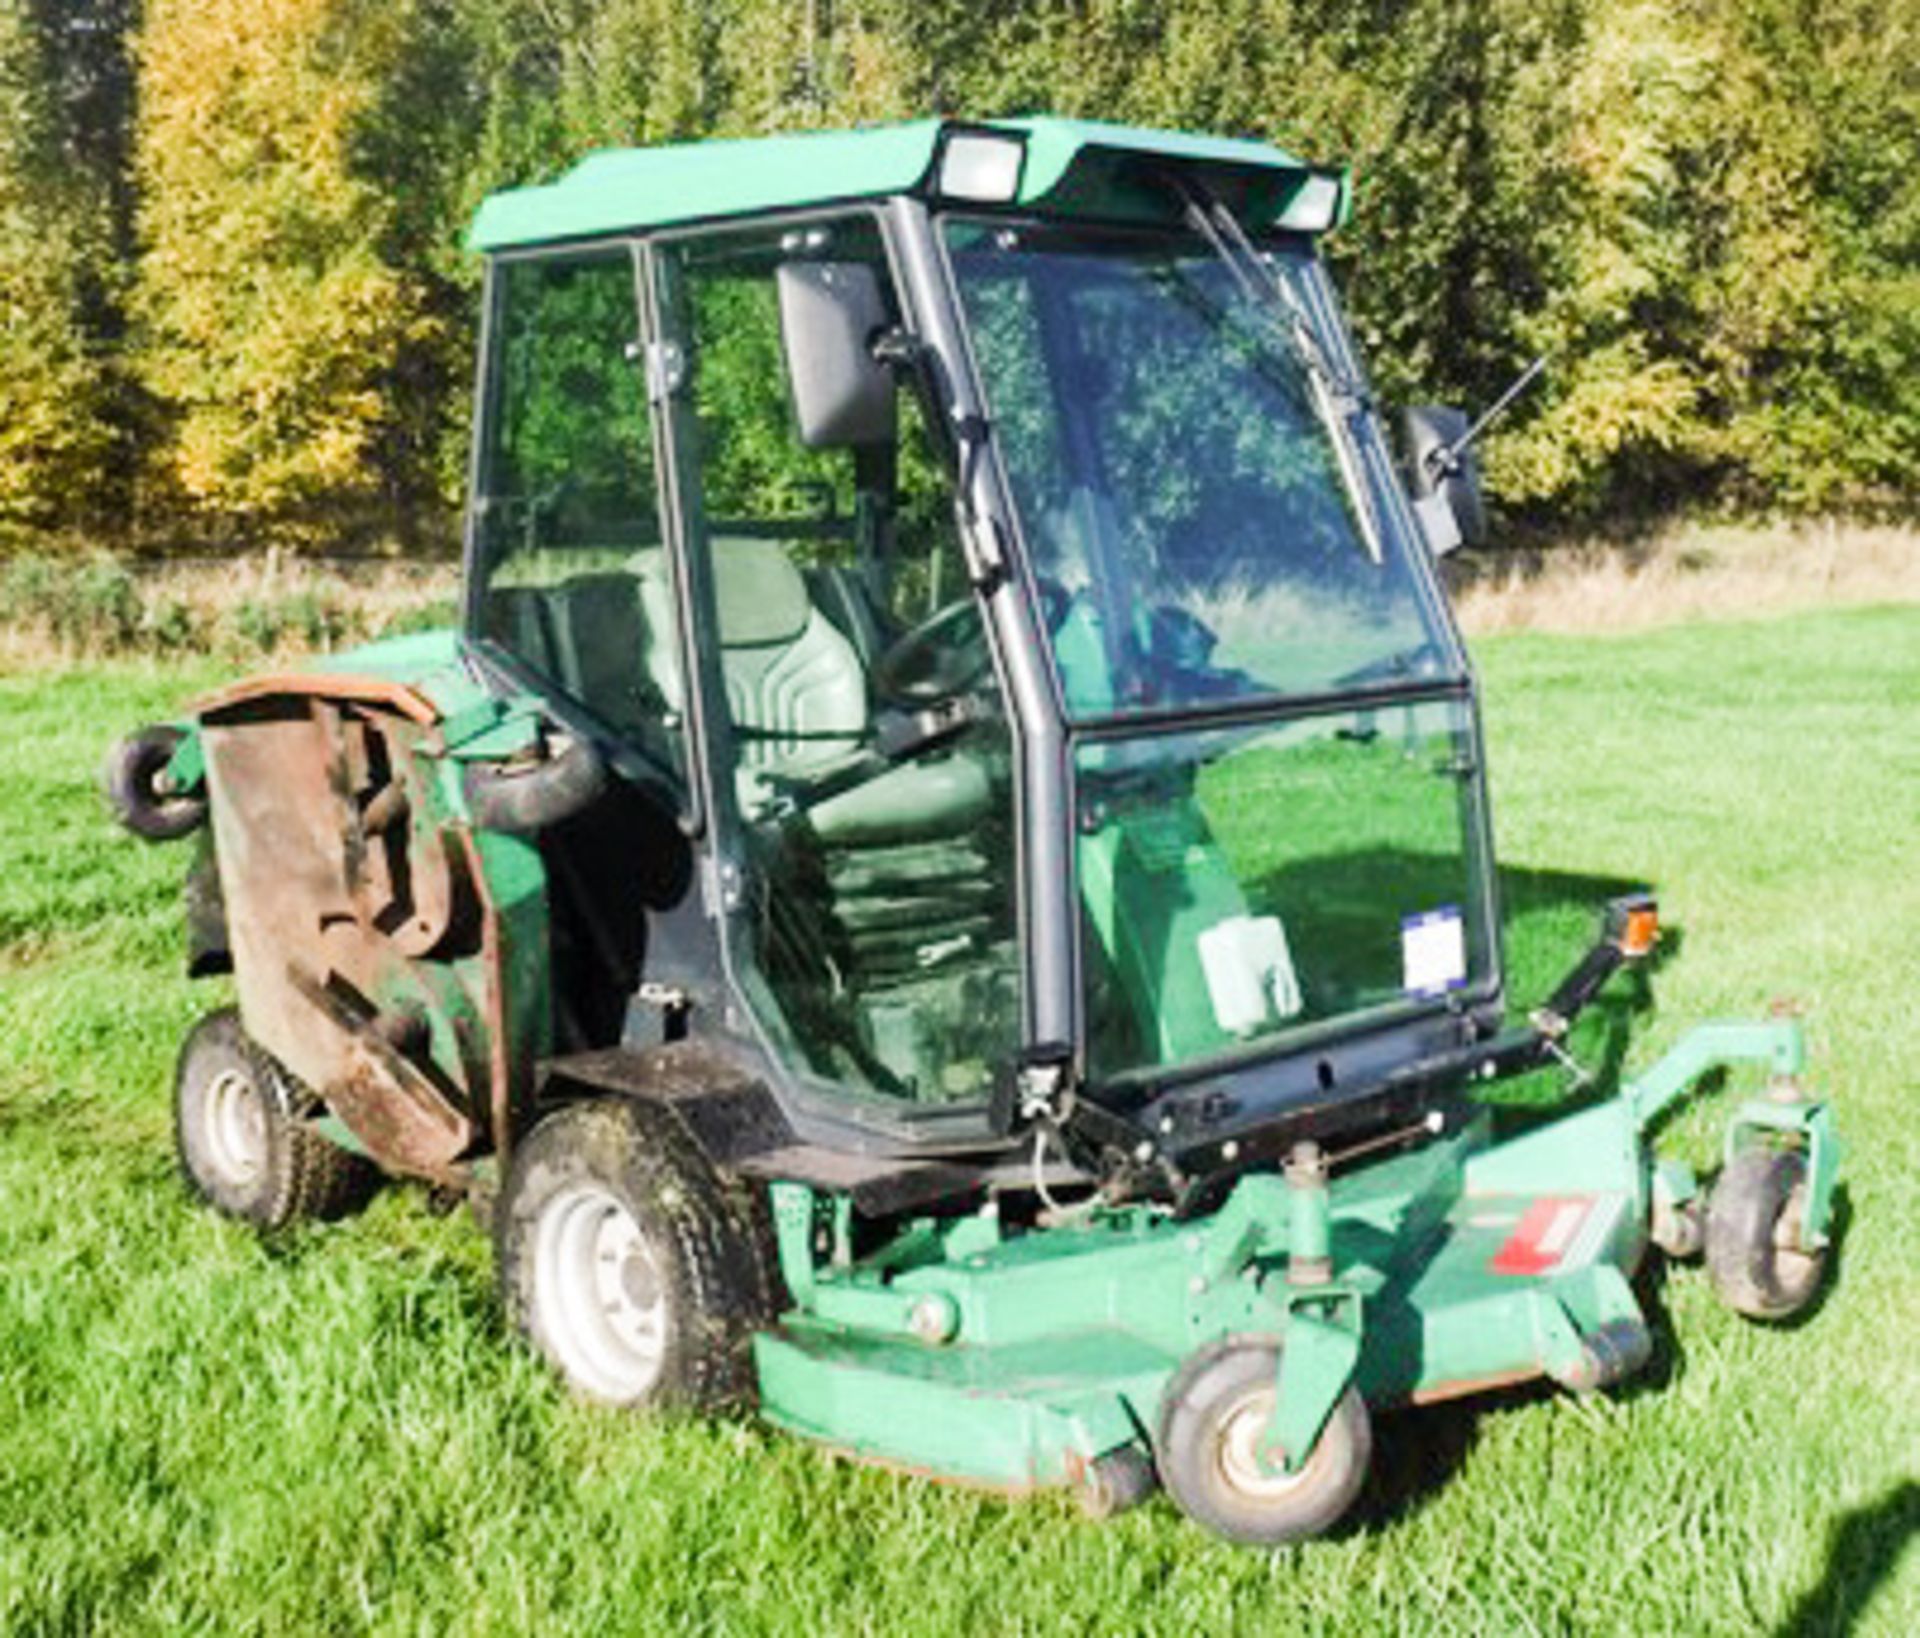 2006 RANSOME HF6010 BATWING ROTARY MOWER, CUTS APPROX 10FT 6INCHS, PERKINS 6 CYLINDER ENGINE, REG KX - Image 8 of 14